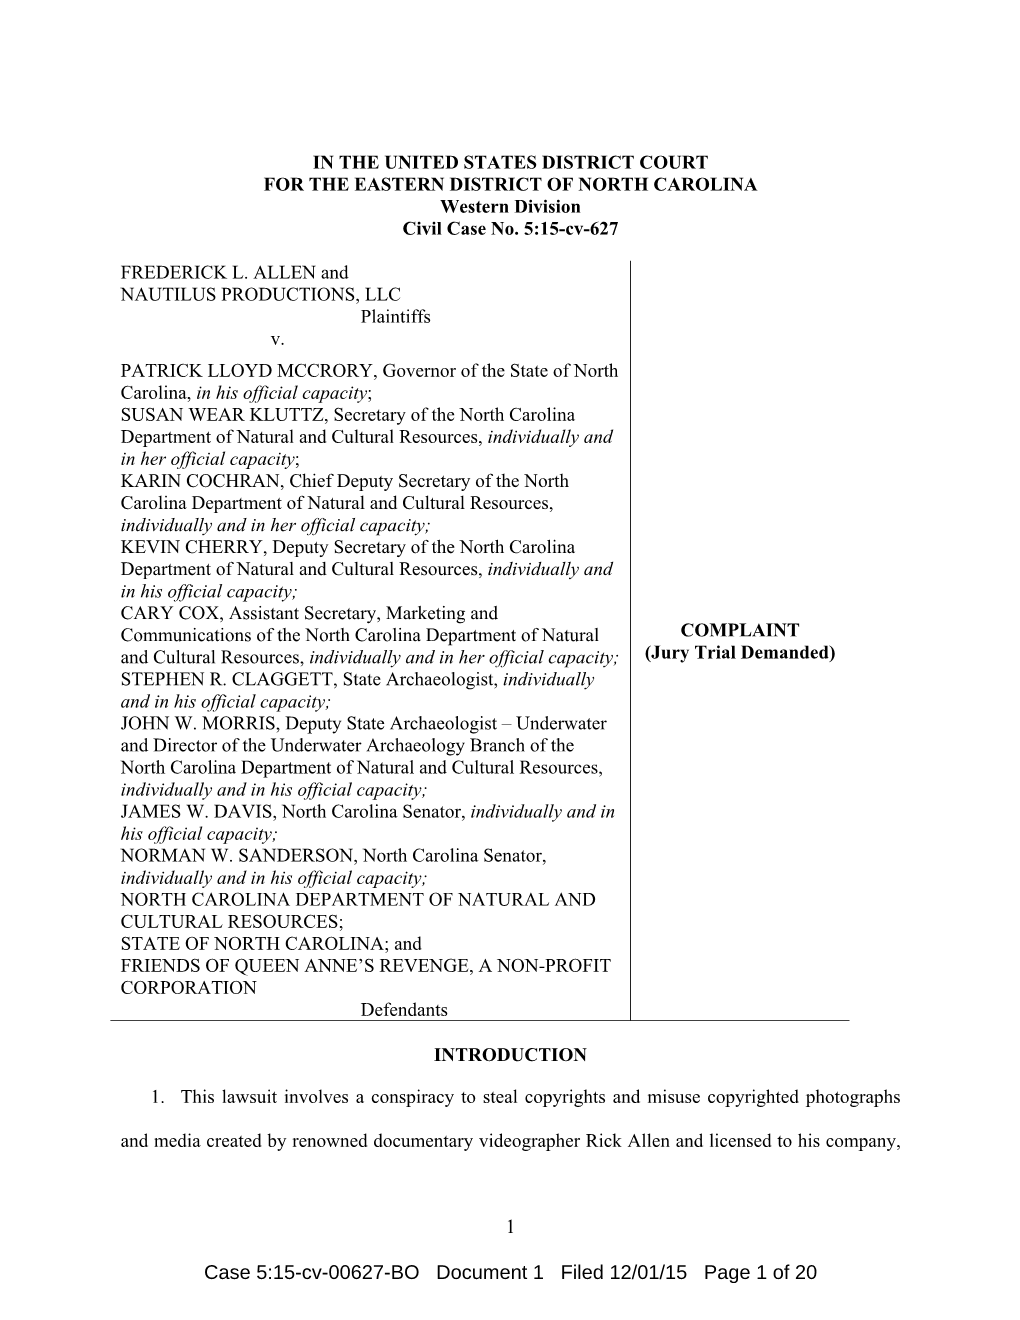 1 Case 5:15-Cv-00627-BO Document 1 Filed 12/01/15 Page 1 of 20